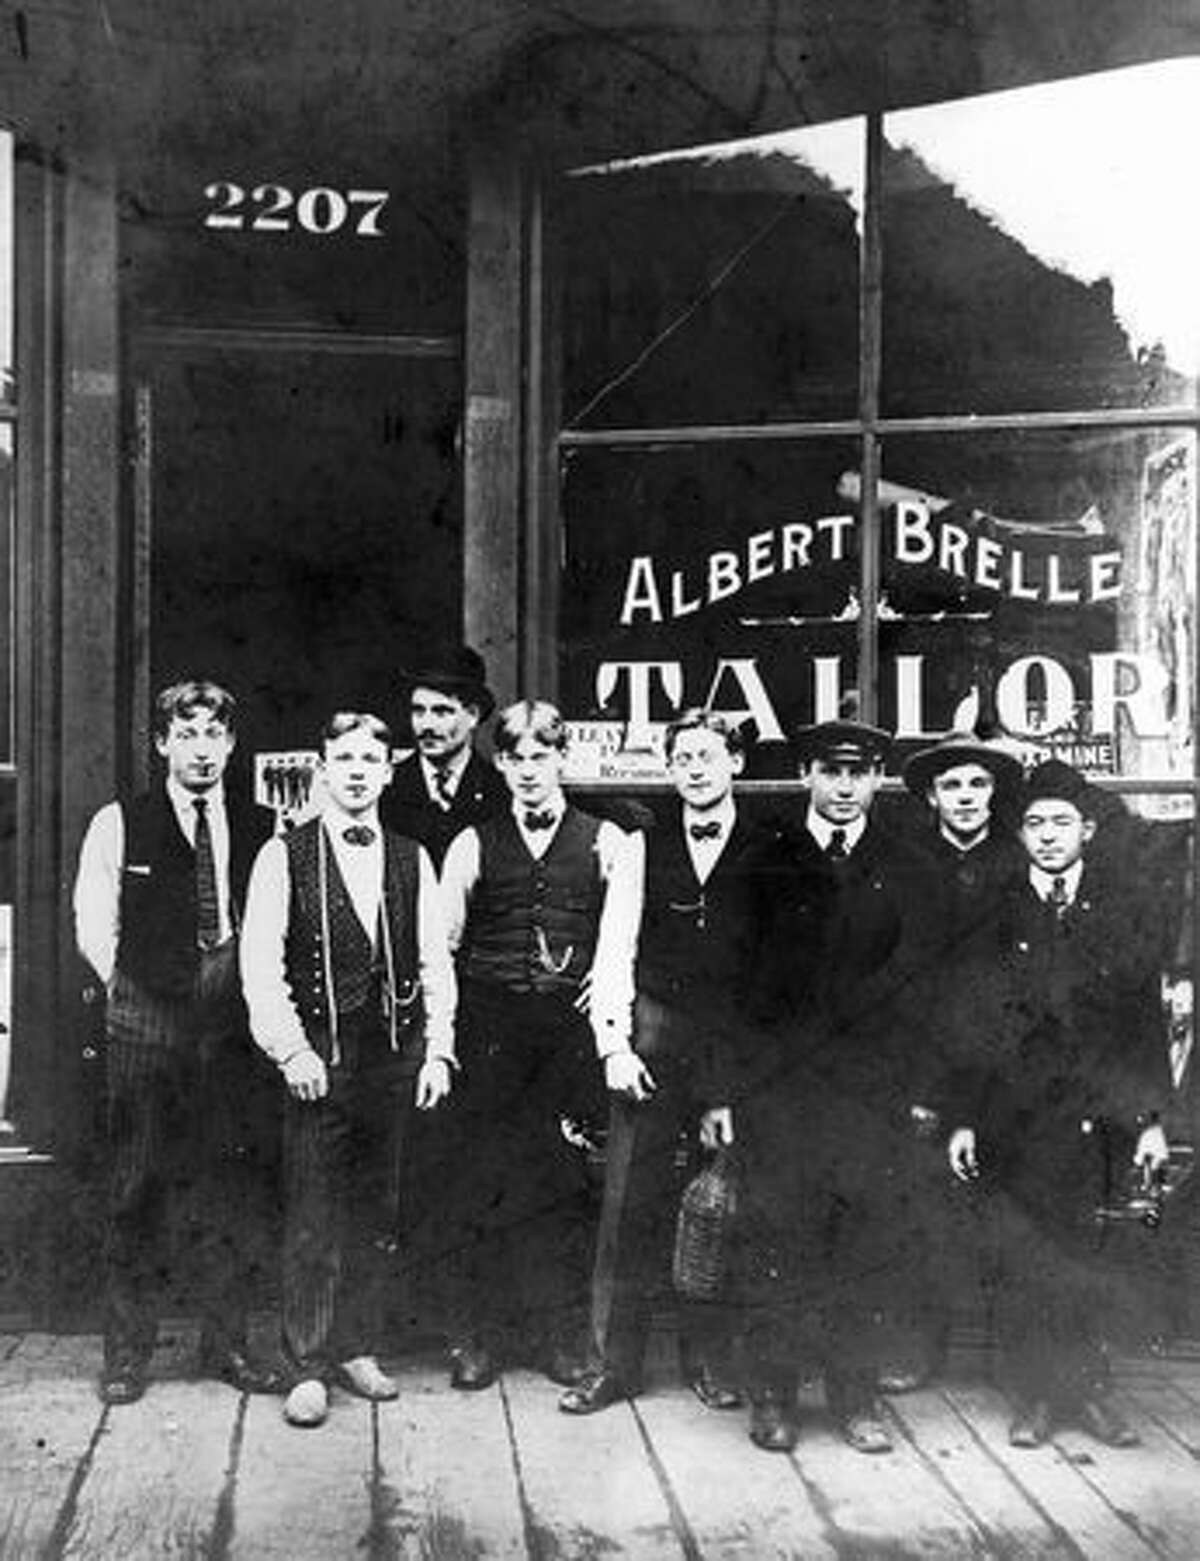 Brelle's Tailor shop at 2207 First Ave. Date unknown.